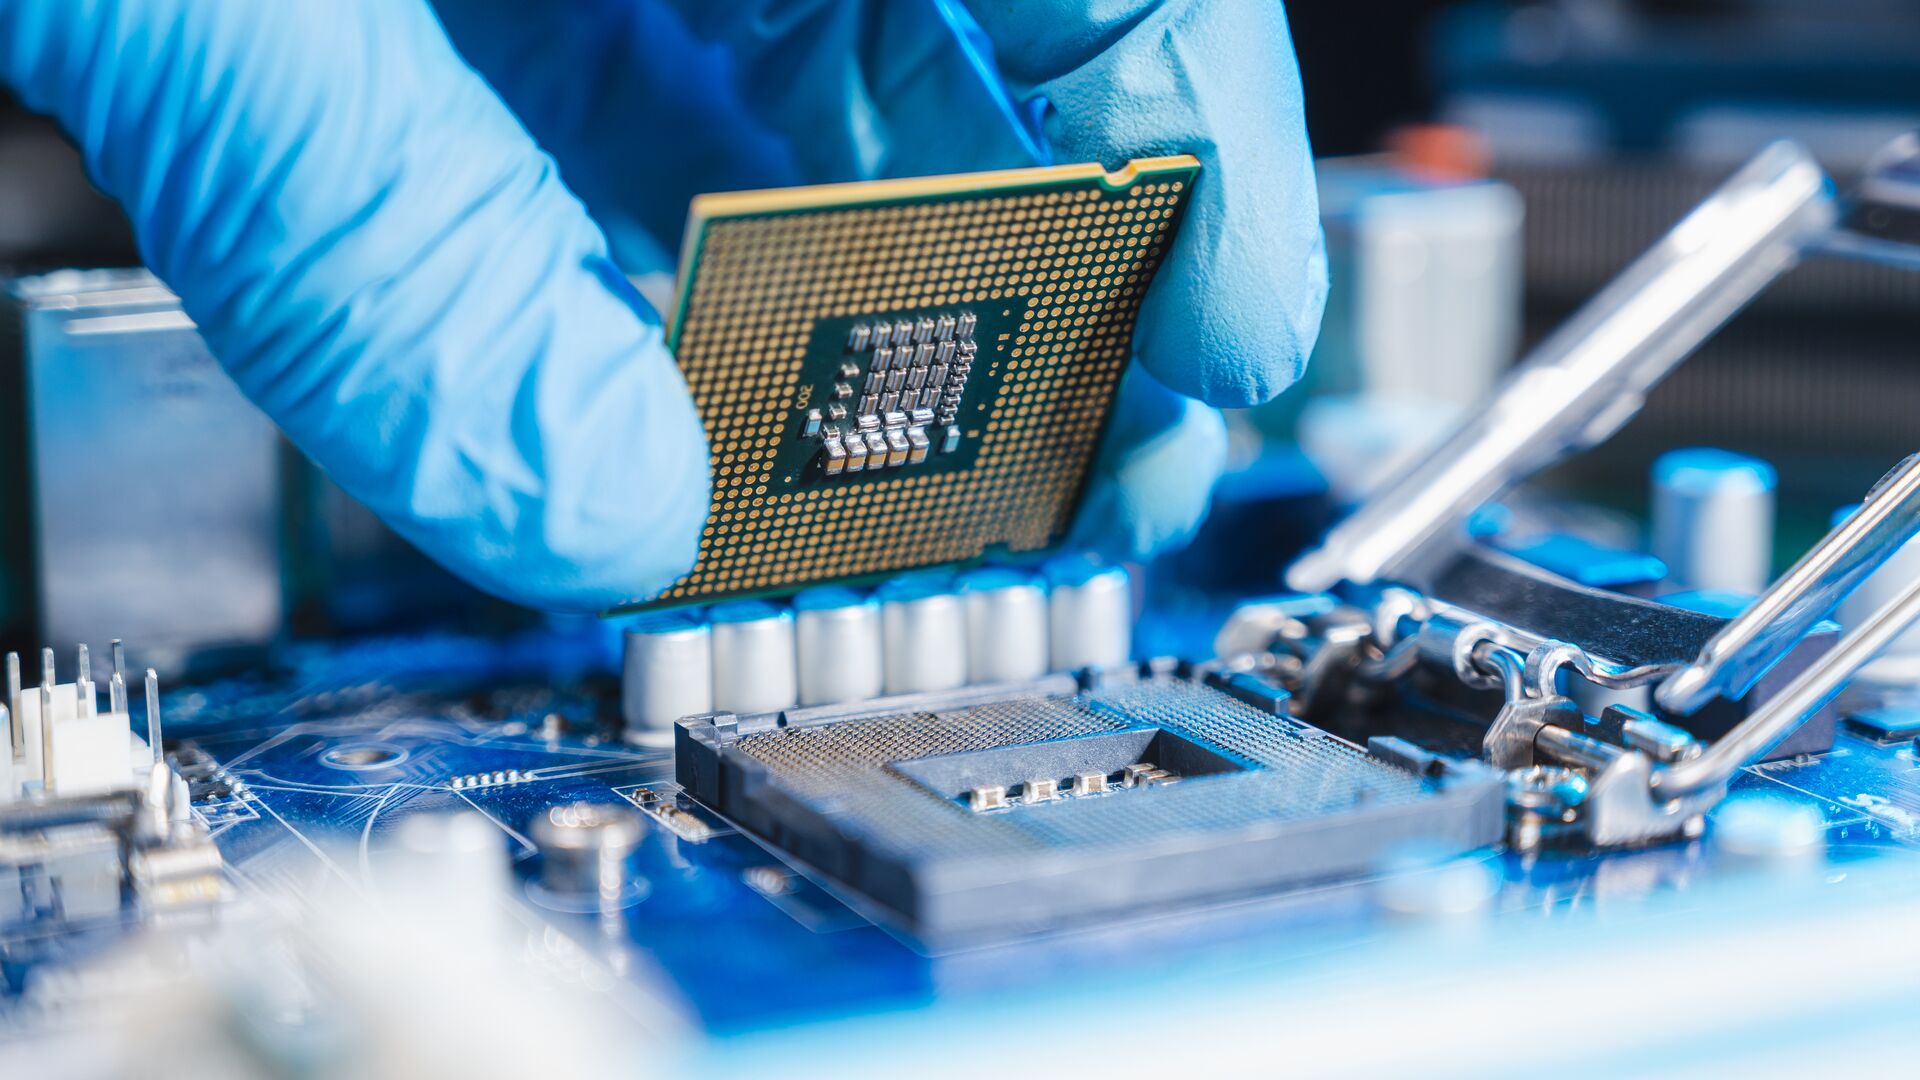 A CPU going into a motherboard, carefully placed by gloved hands and utilizing cutting-edge semiconductor technology.